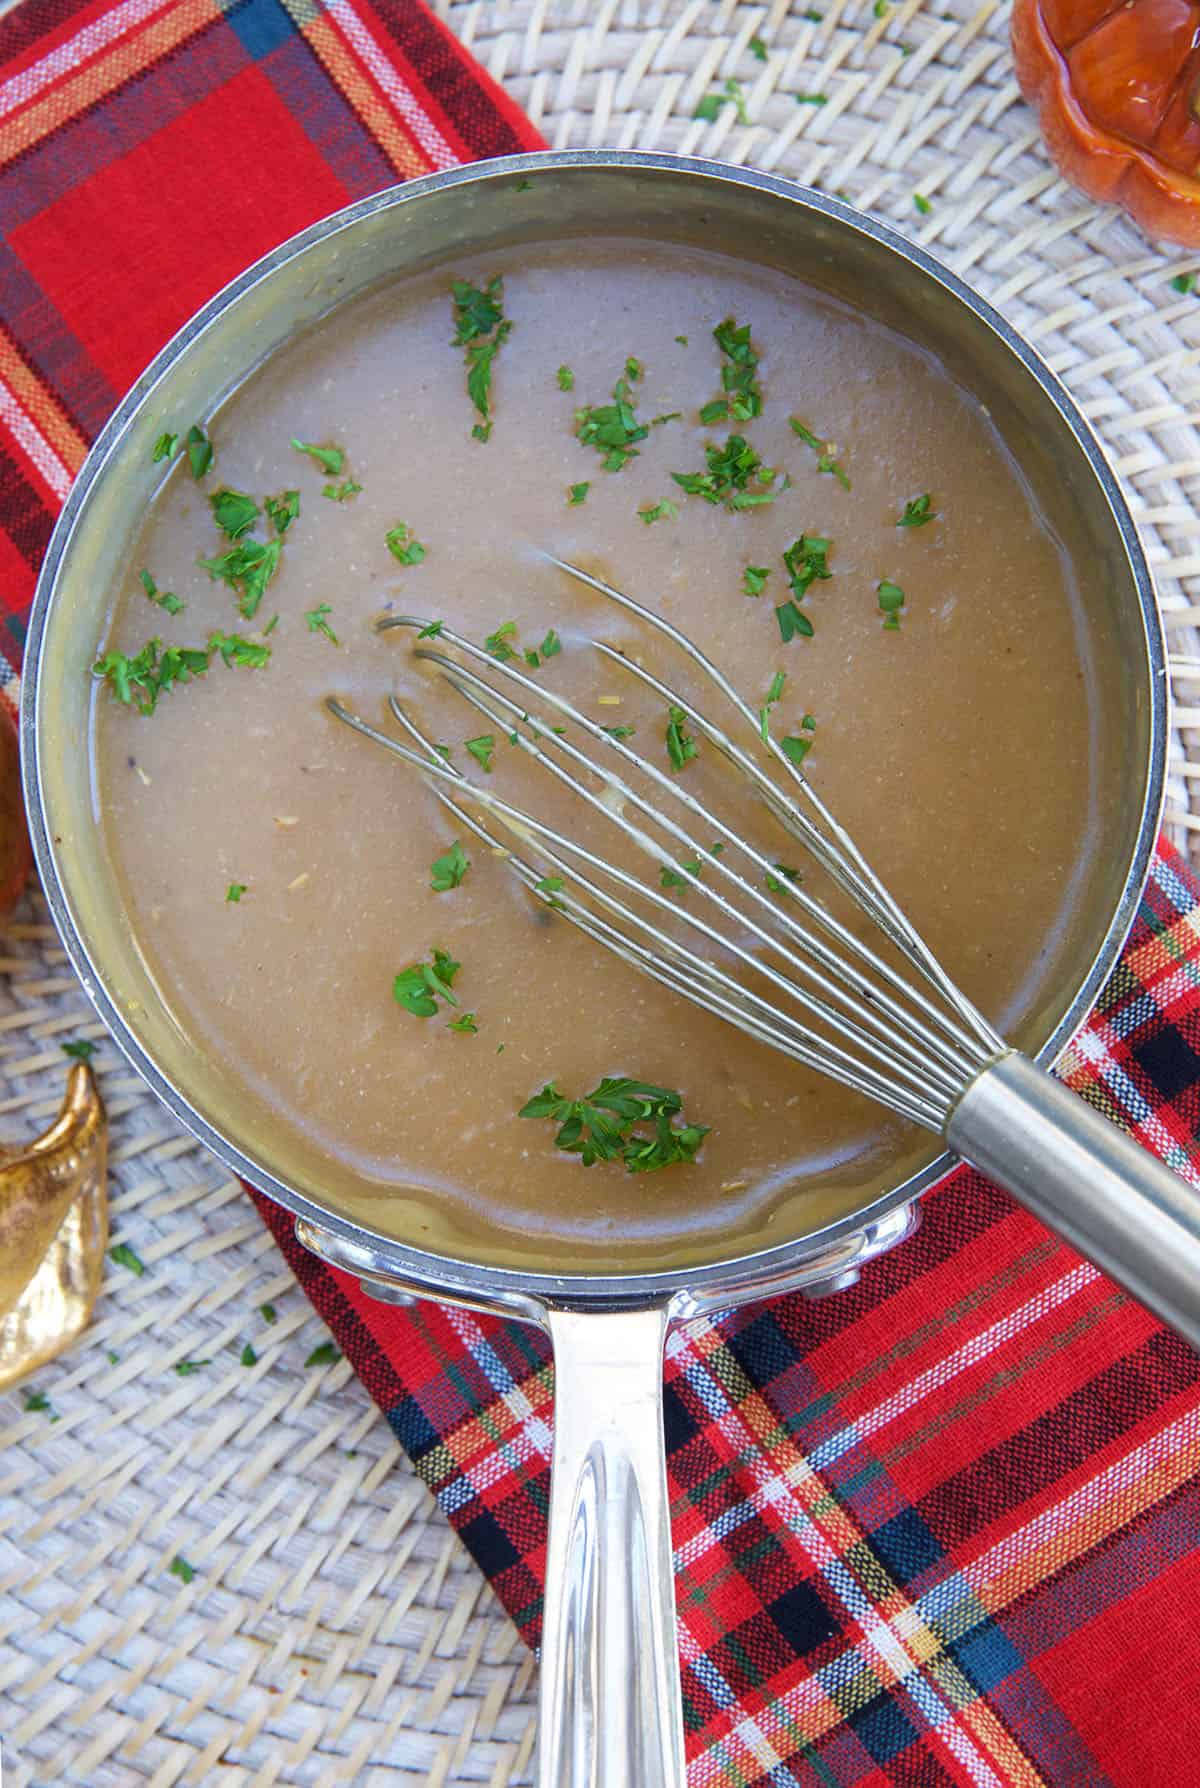 A whisk is placed in a pot full of gravy.